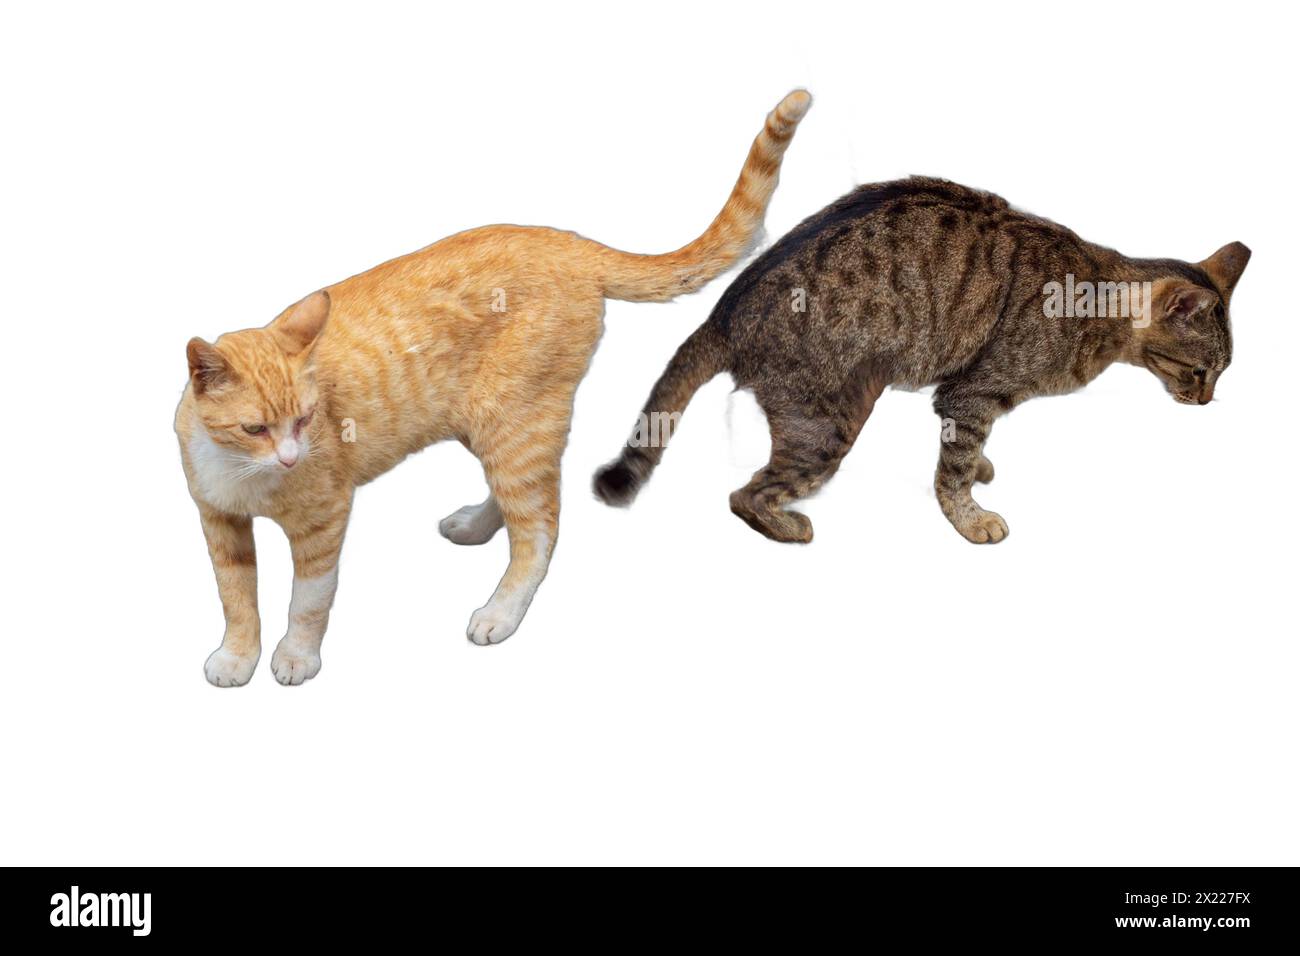 Two adorable cats, one orange and one gray with stripes, isolated on transparent backgrounds. Perfect for pet-related designs, animal illustrations, a Stock Photo